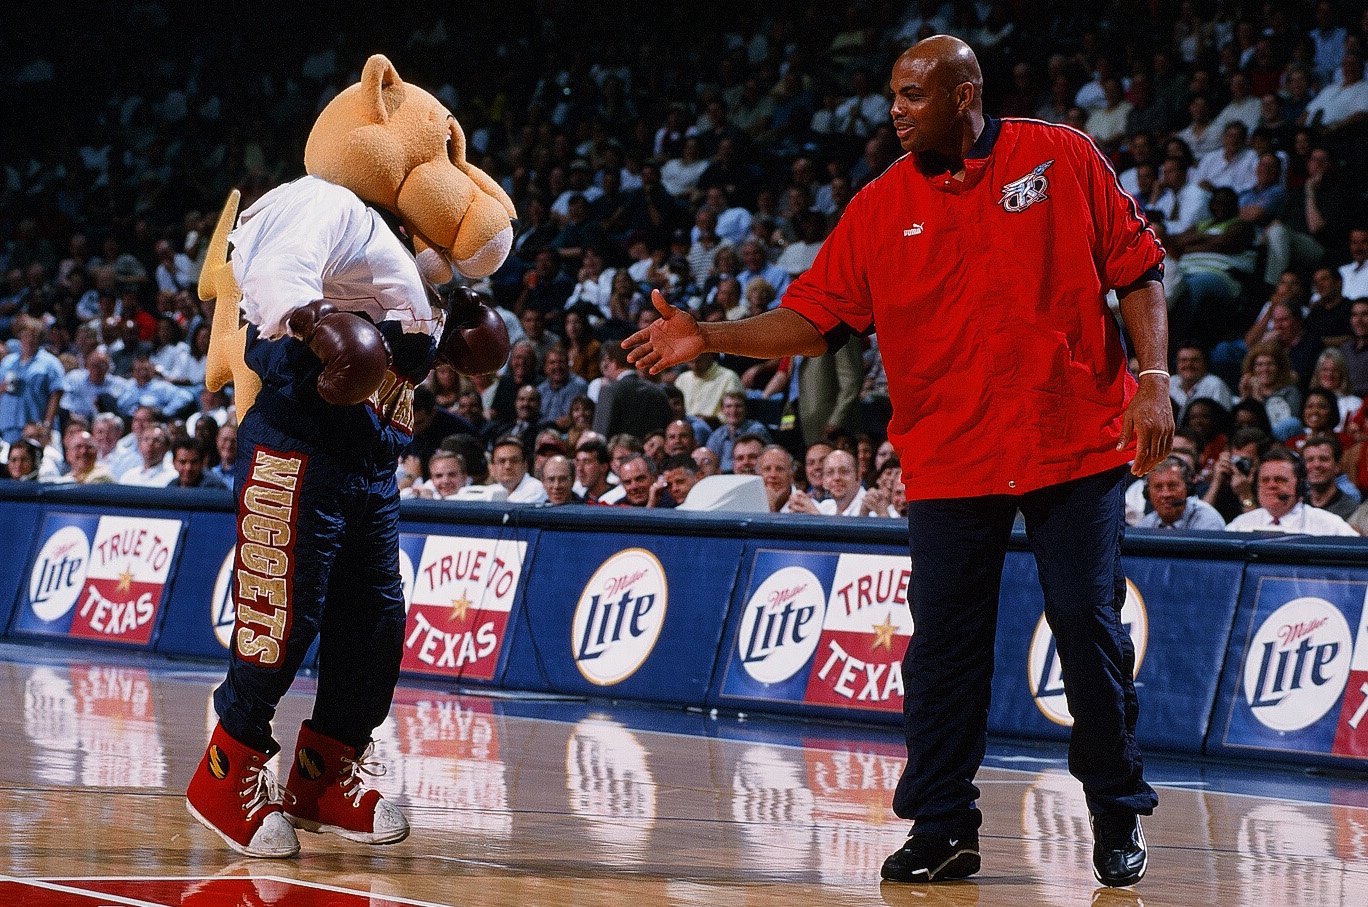 Charles Barkley of the Houston Rockets greets the Denver Nuggets mascot, Rocky, during the game against the Vancouver Grizzlies on April 19, 2000.